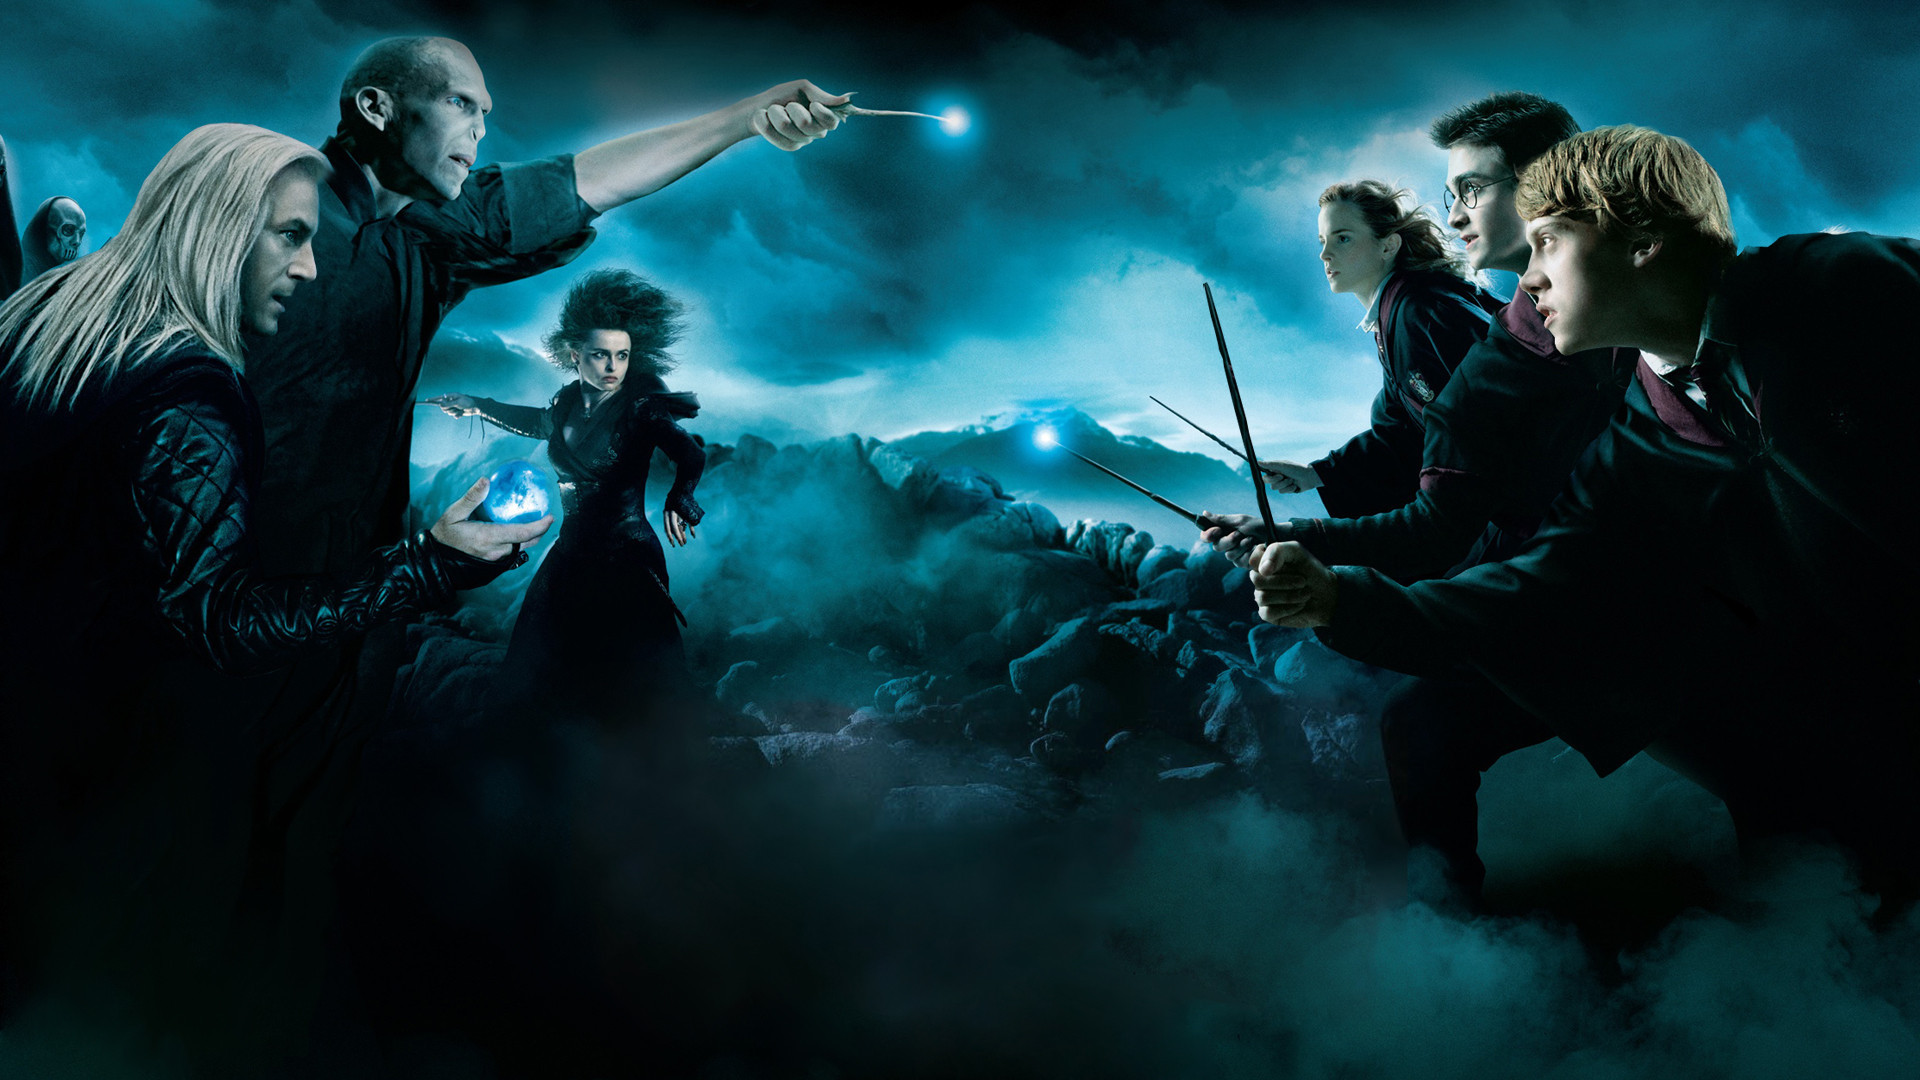 Harry Potter And The Order Of The Phoenix Wallpapers